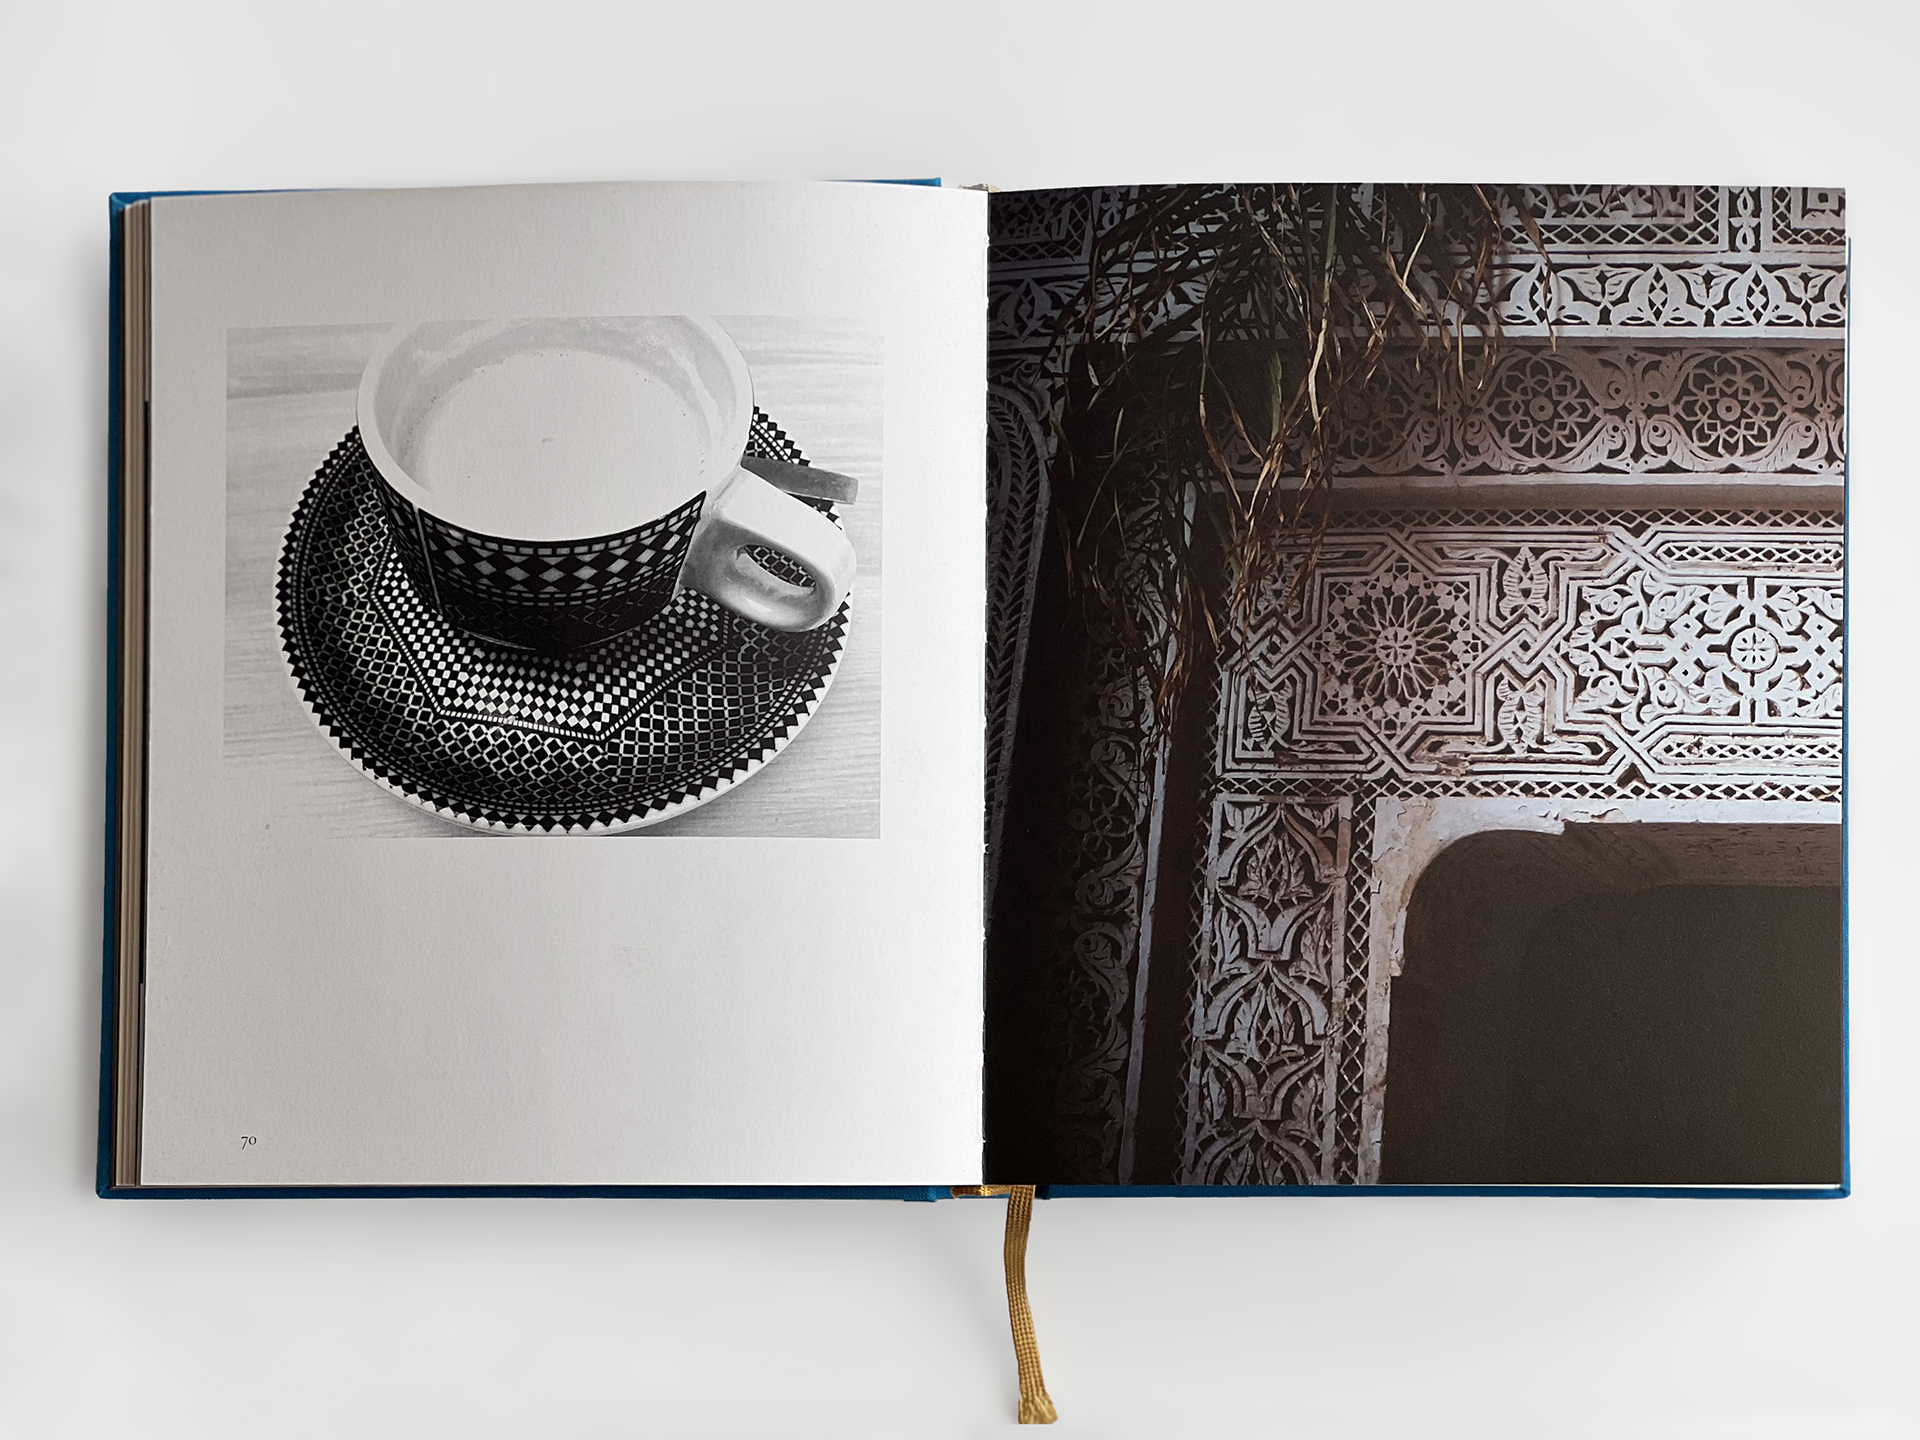 Pages from the book “Ivana Ivković facing Morocco“, open book image